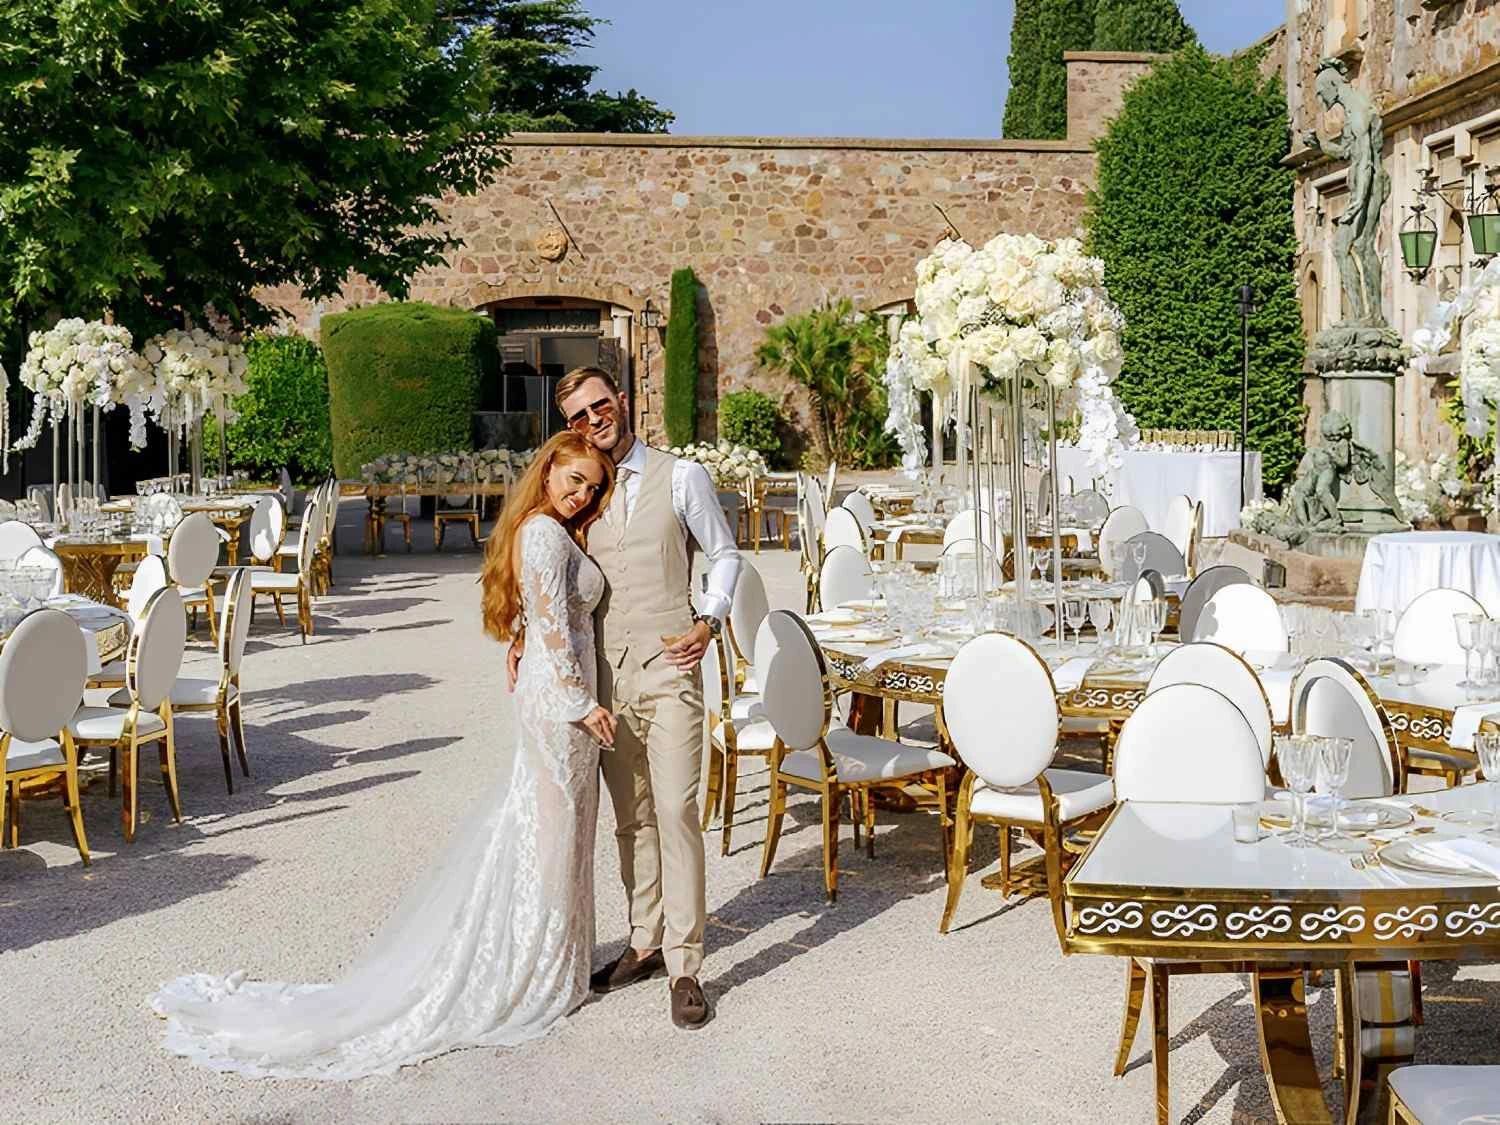 10 regions to have an authentic destination wedding in France